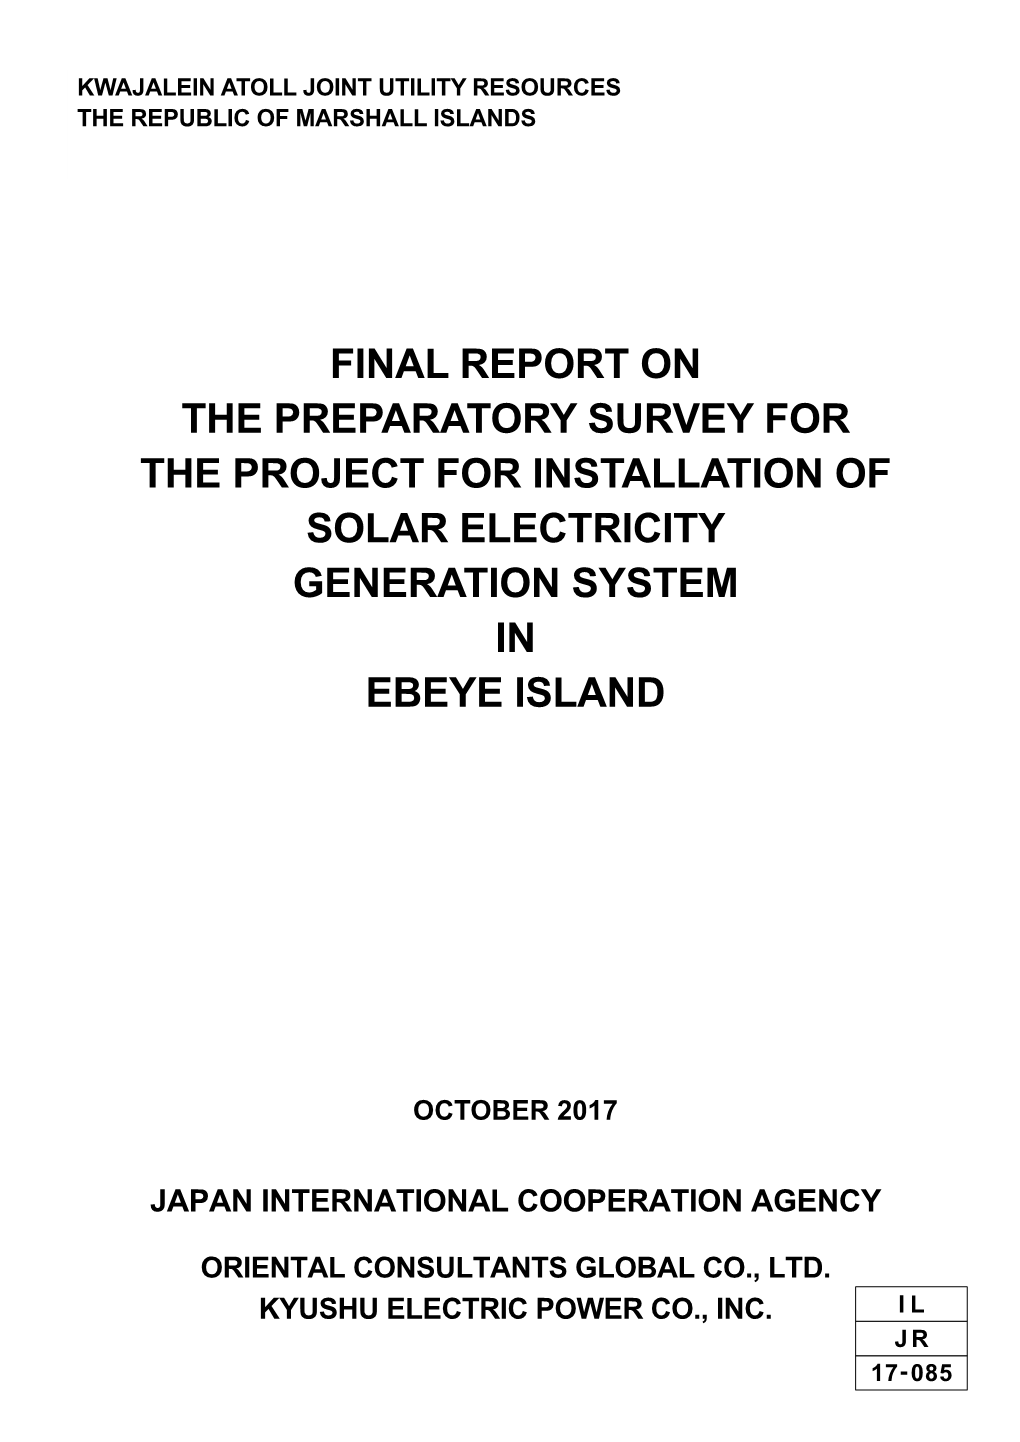 Final Report on the Preparatory Survey for the Project for Installation of Solar Electricity Generation System in Ebeye Island